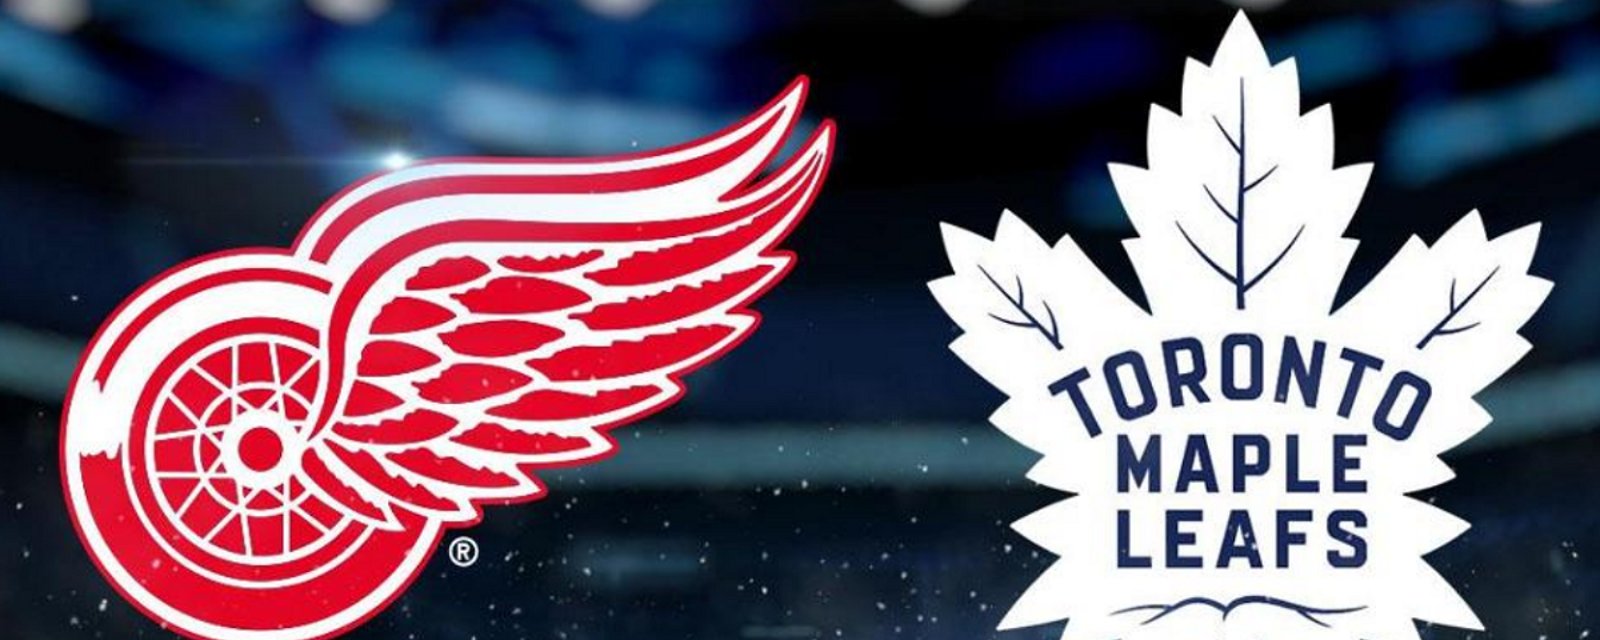 Full lineups for clash between Red Wings and Maple Leafs.